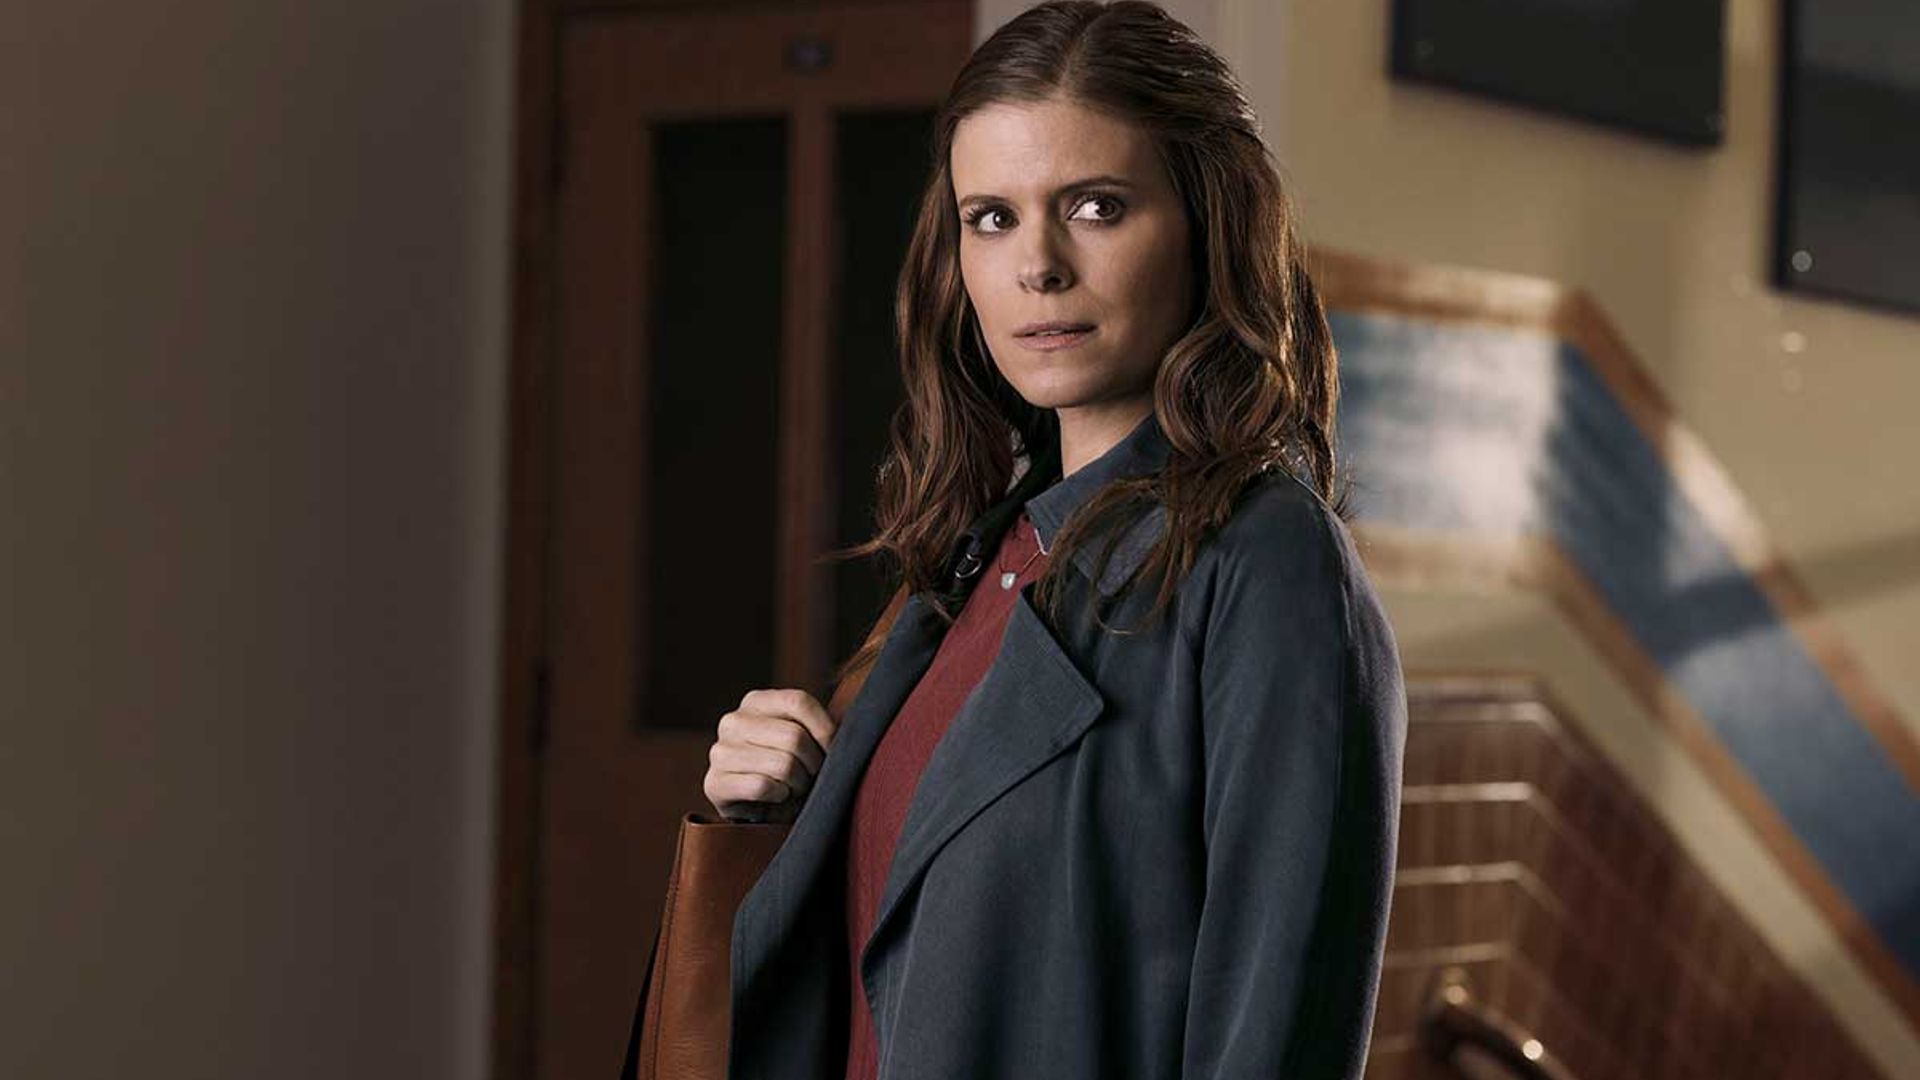 Kate Mara weighs in on the controversial ending of A Teacher